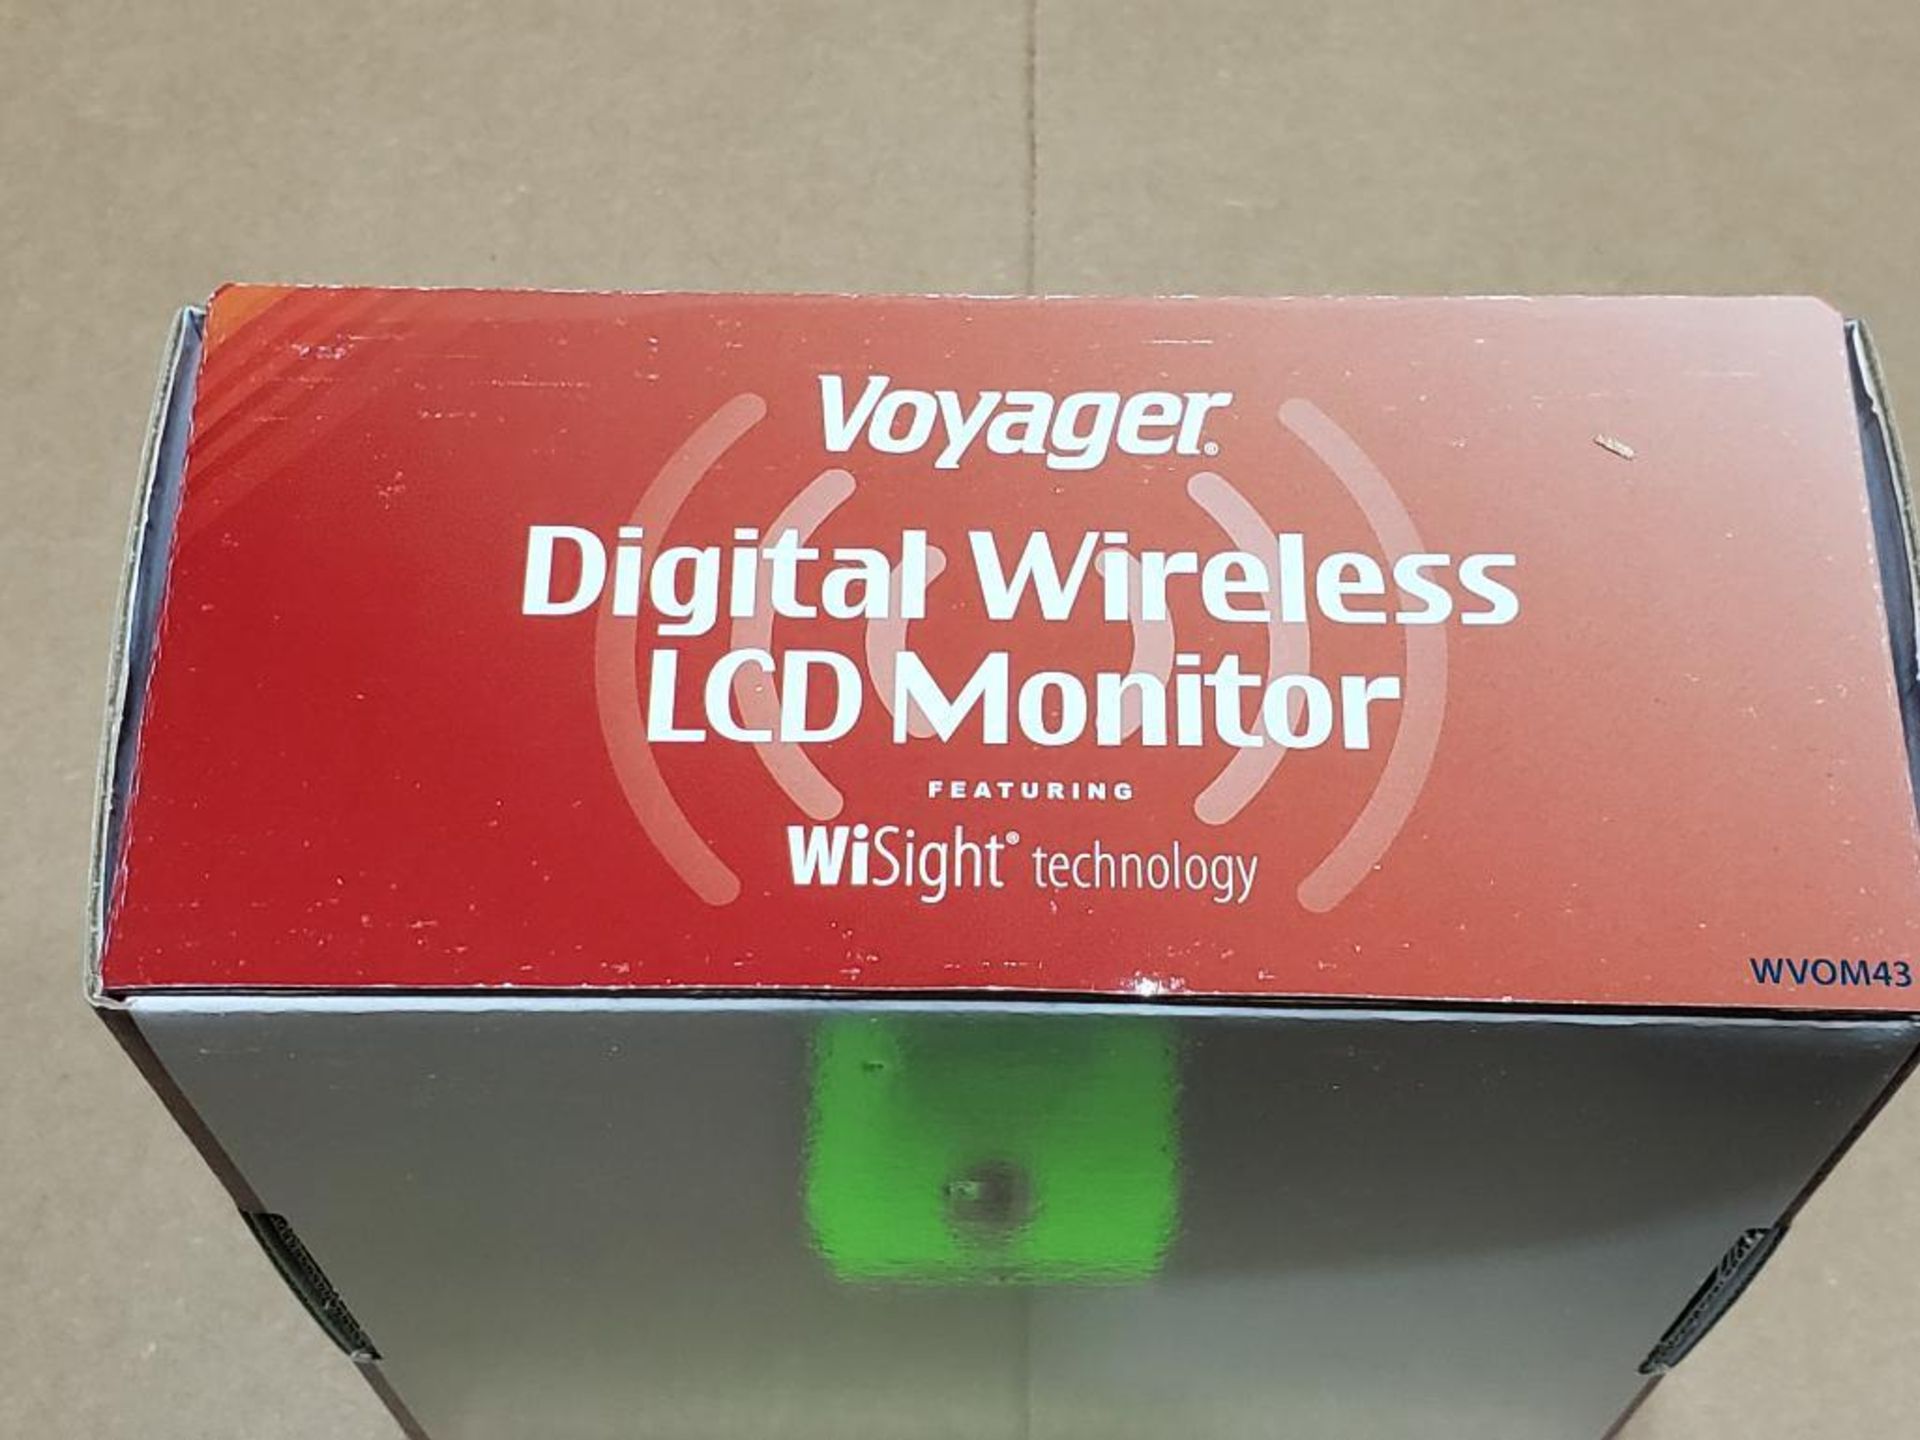 Voyager Digital Wireless LCD Monitor. Features WiSight techology. Model WVOM43. - Image 5 of 6